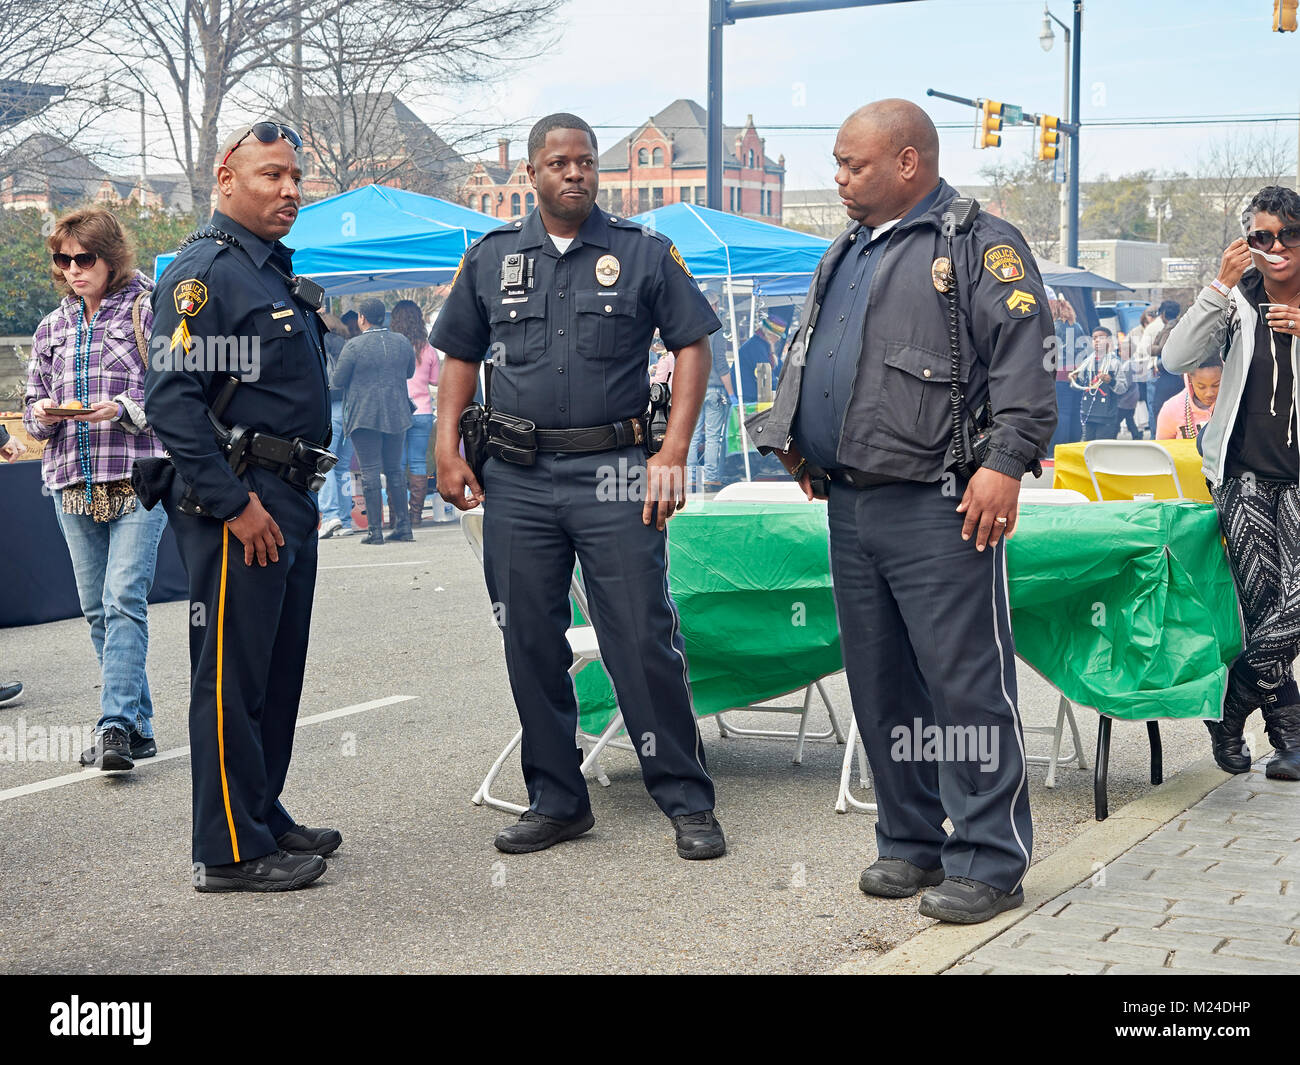 Three African American police officers standing together during street celebration in downtown Montgomery Alabama, United States. Stock Photo